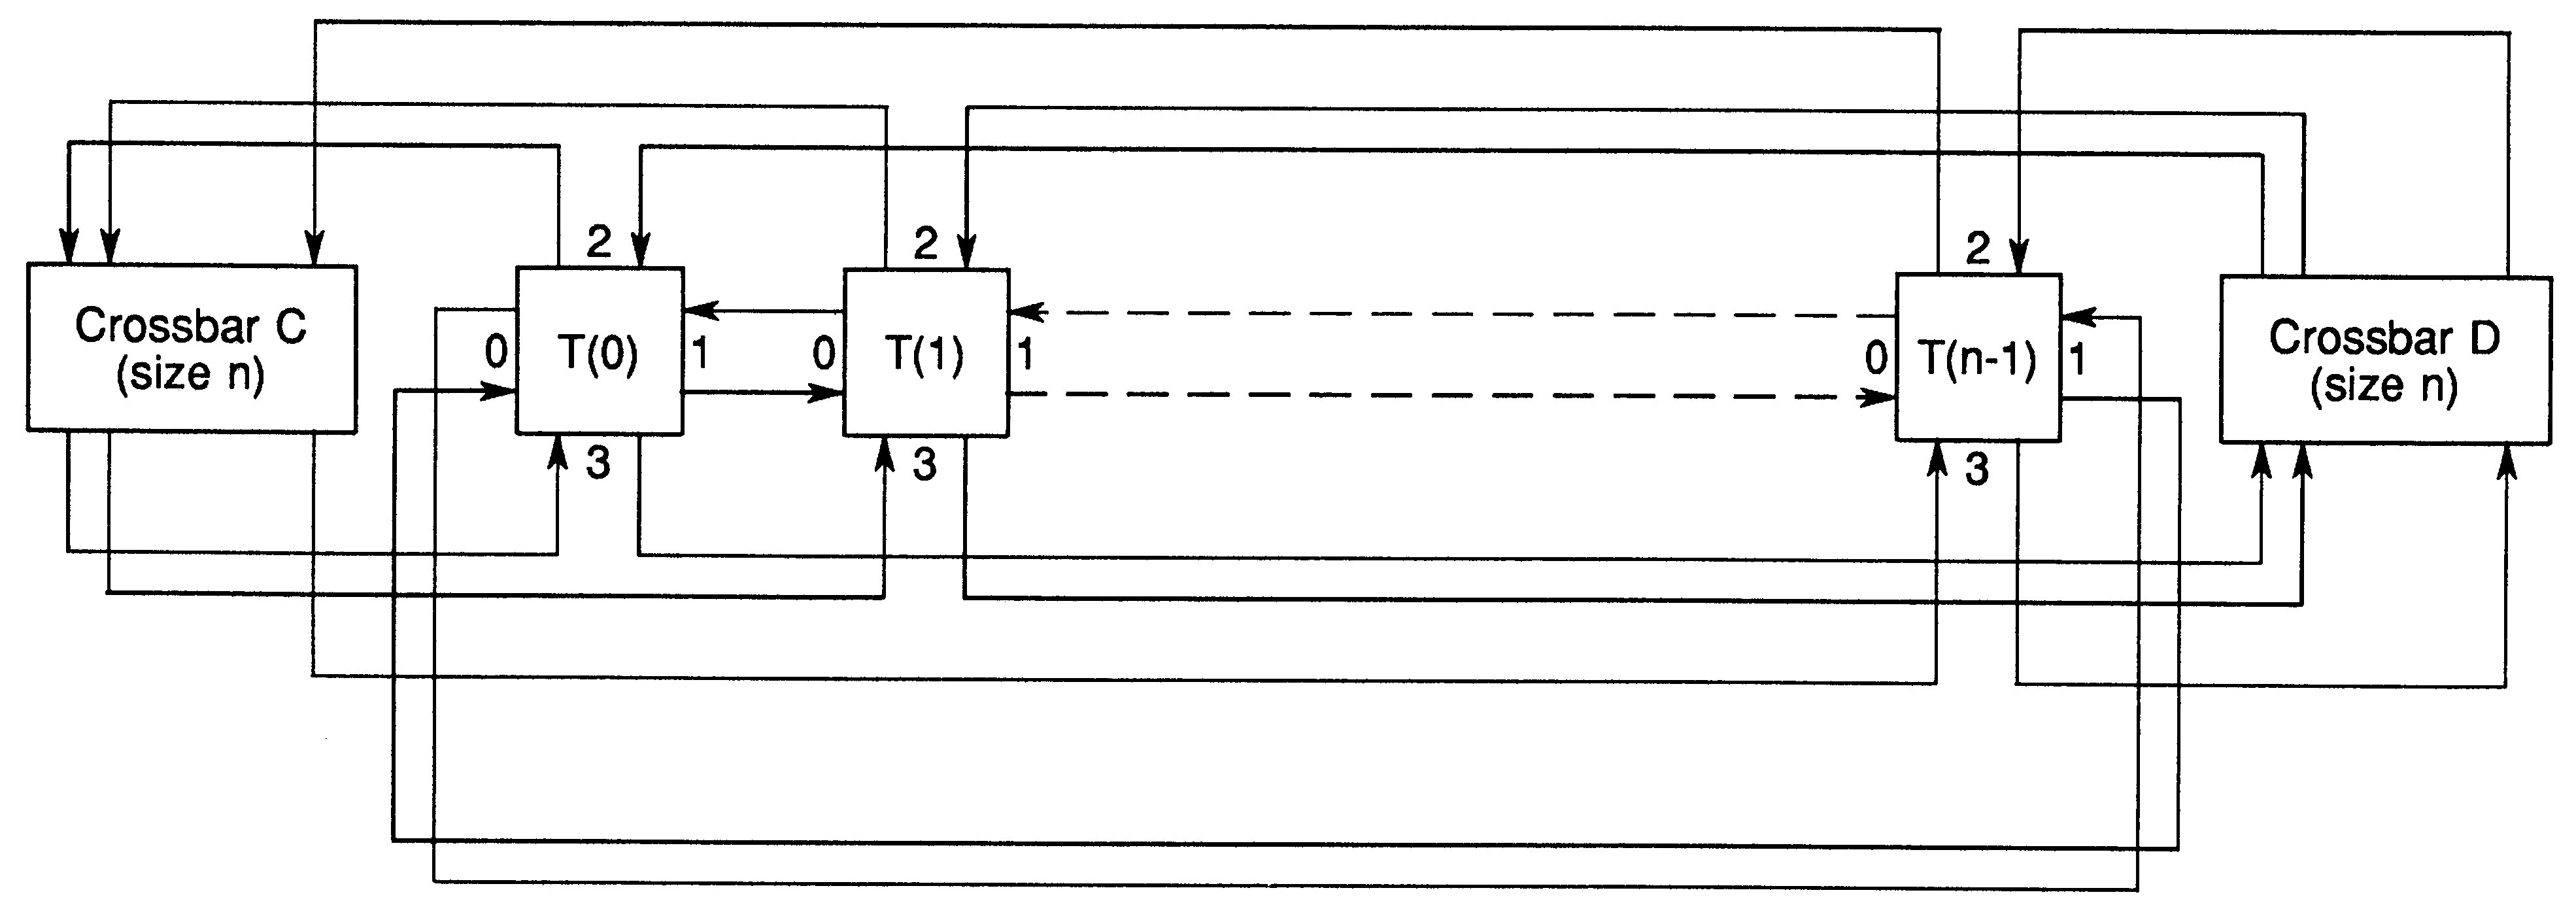 Complete
connectivity of a network using two crossbars